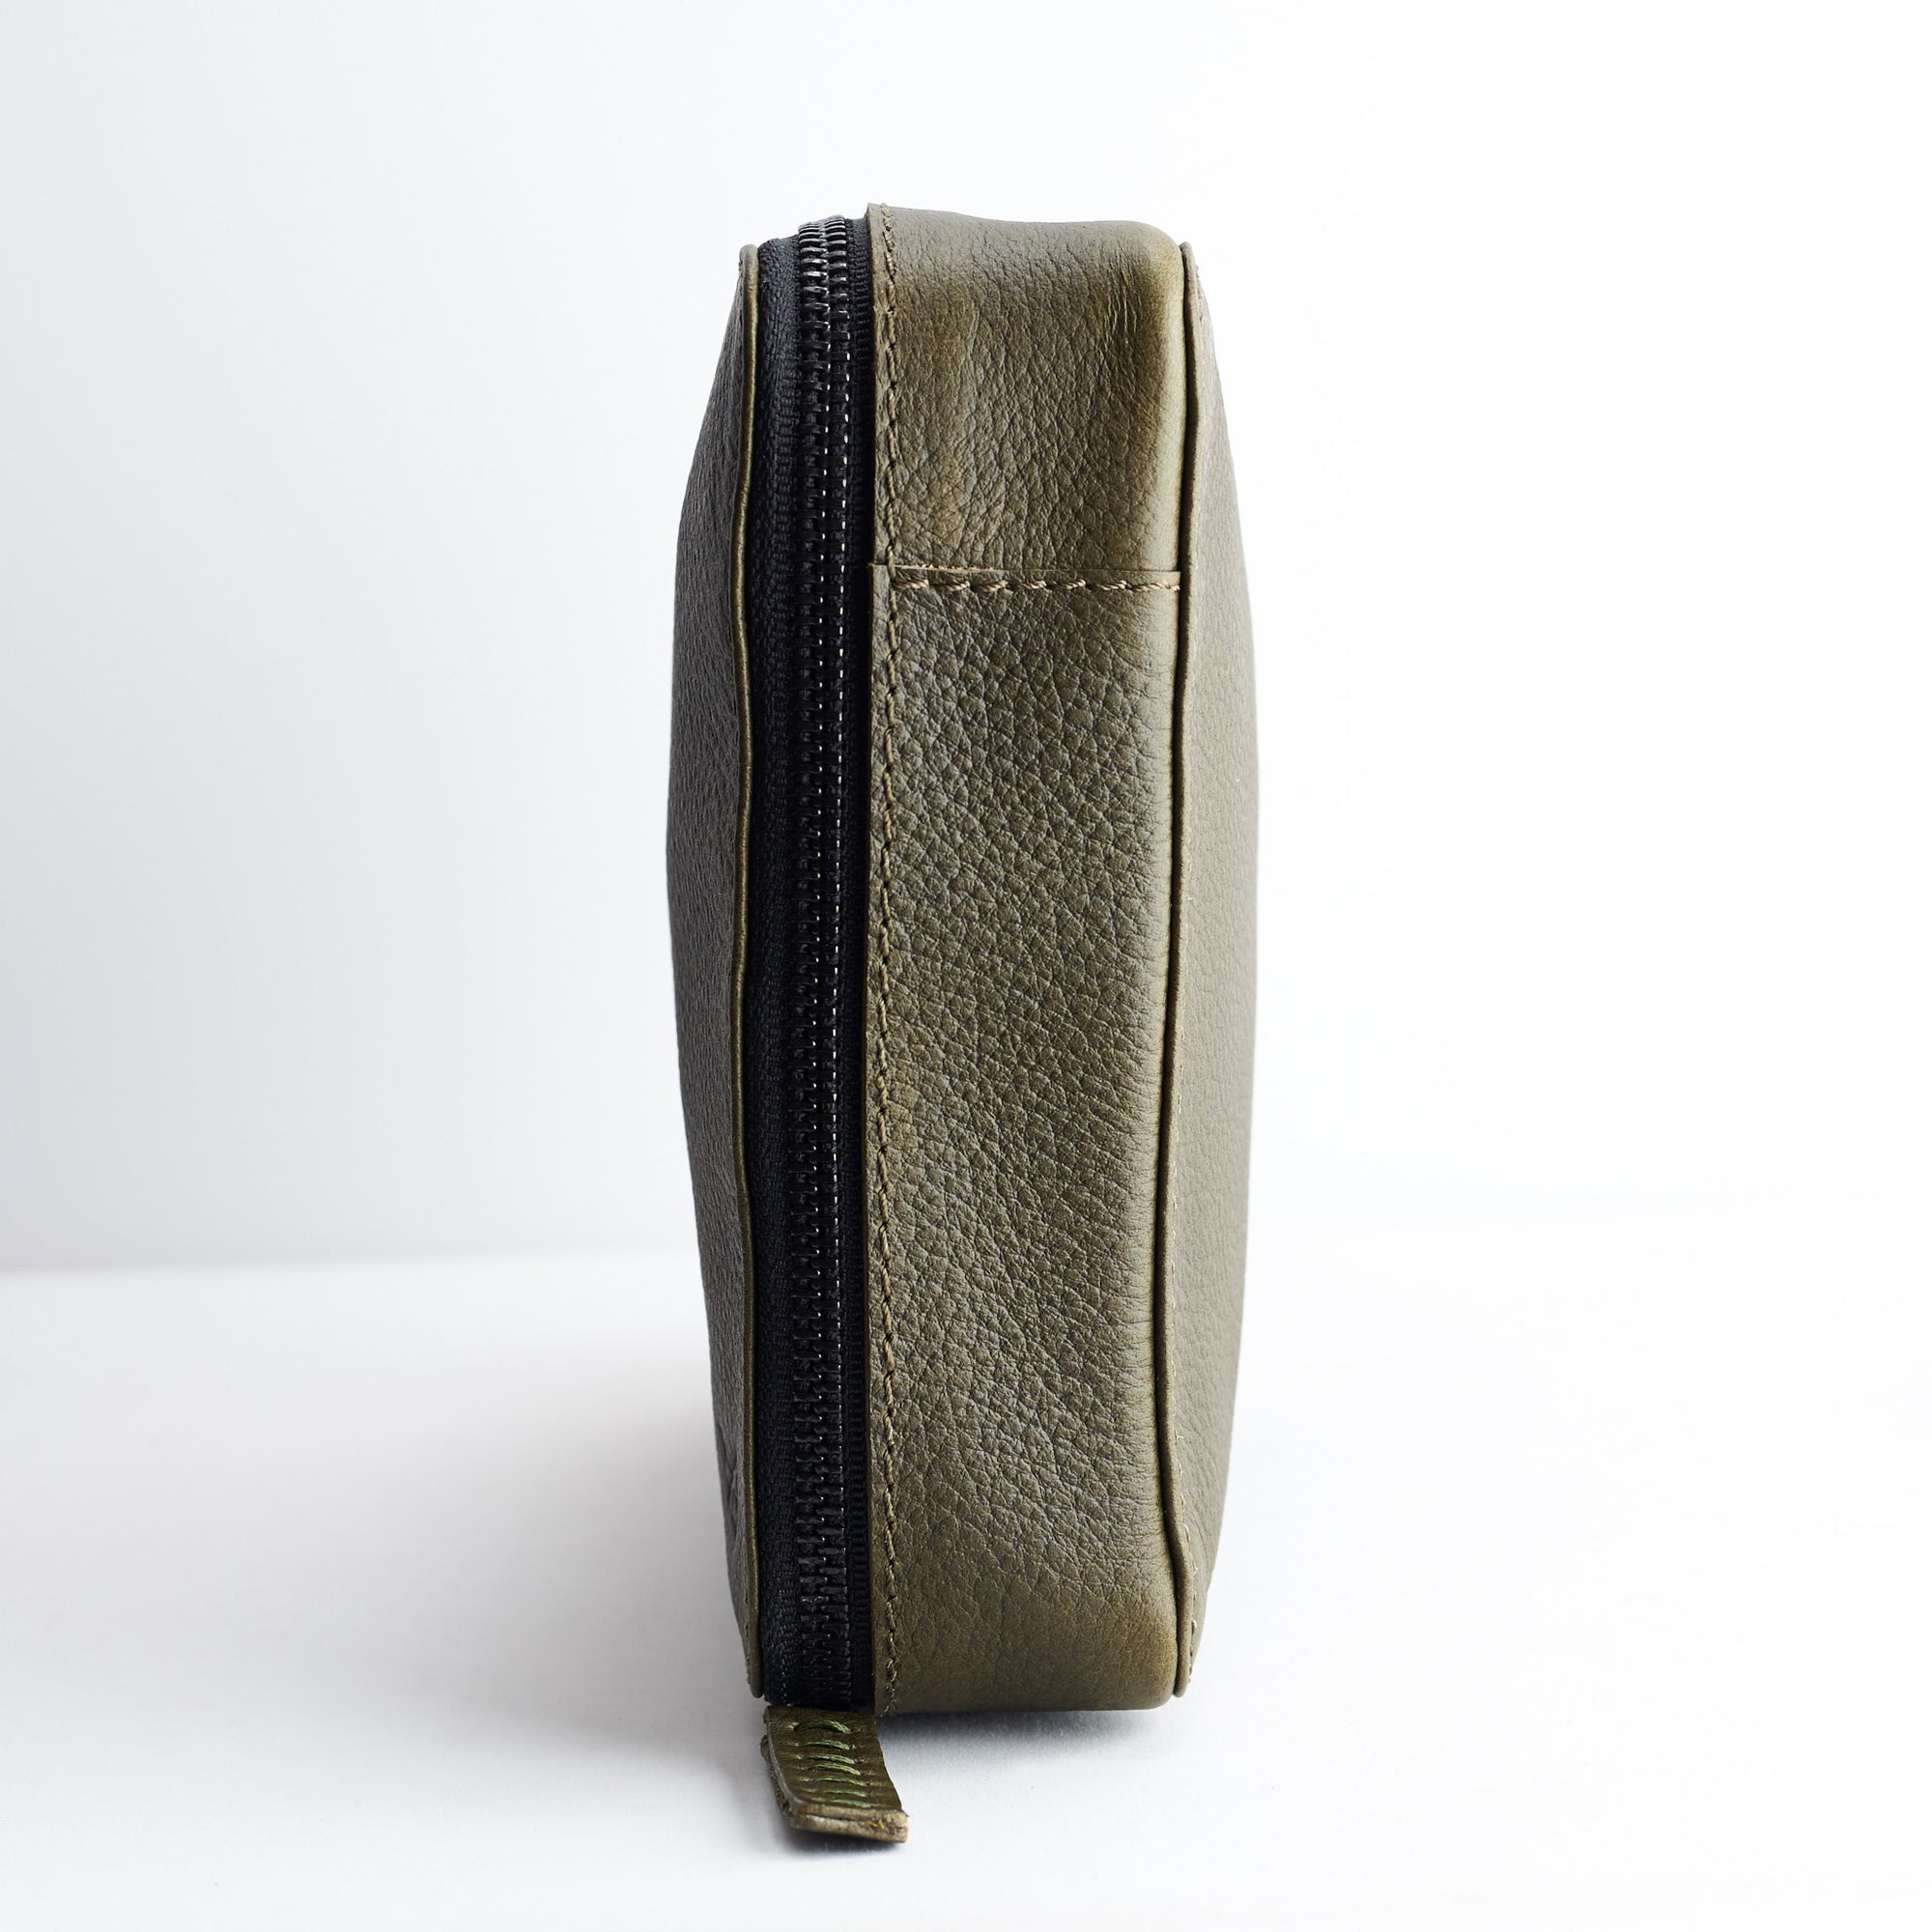 Slim profile. Small carry-all bag tech bag green by Capra Leather